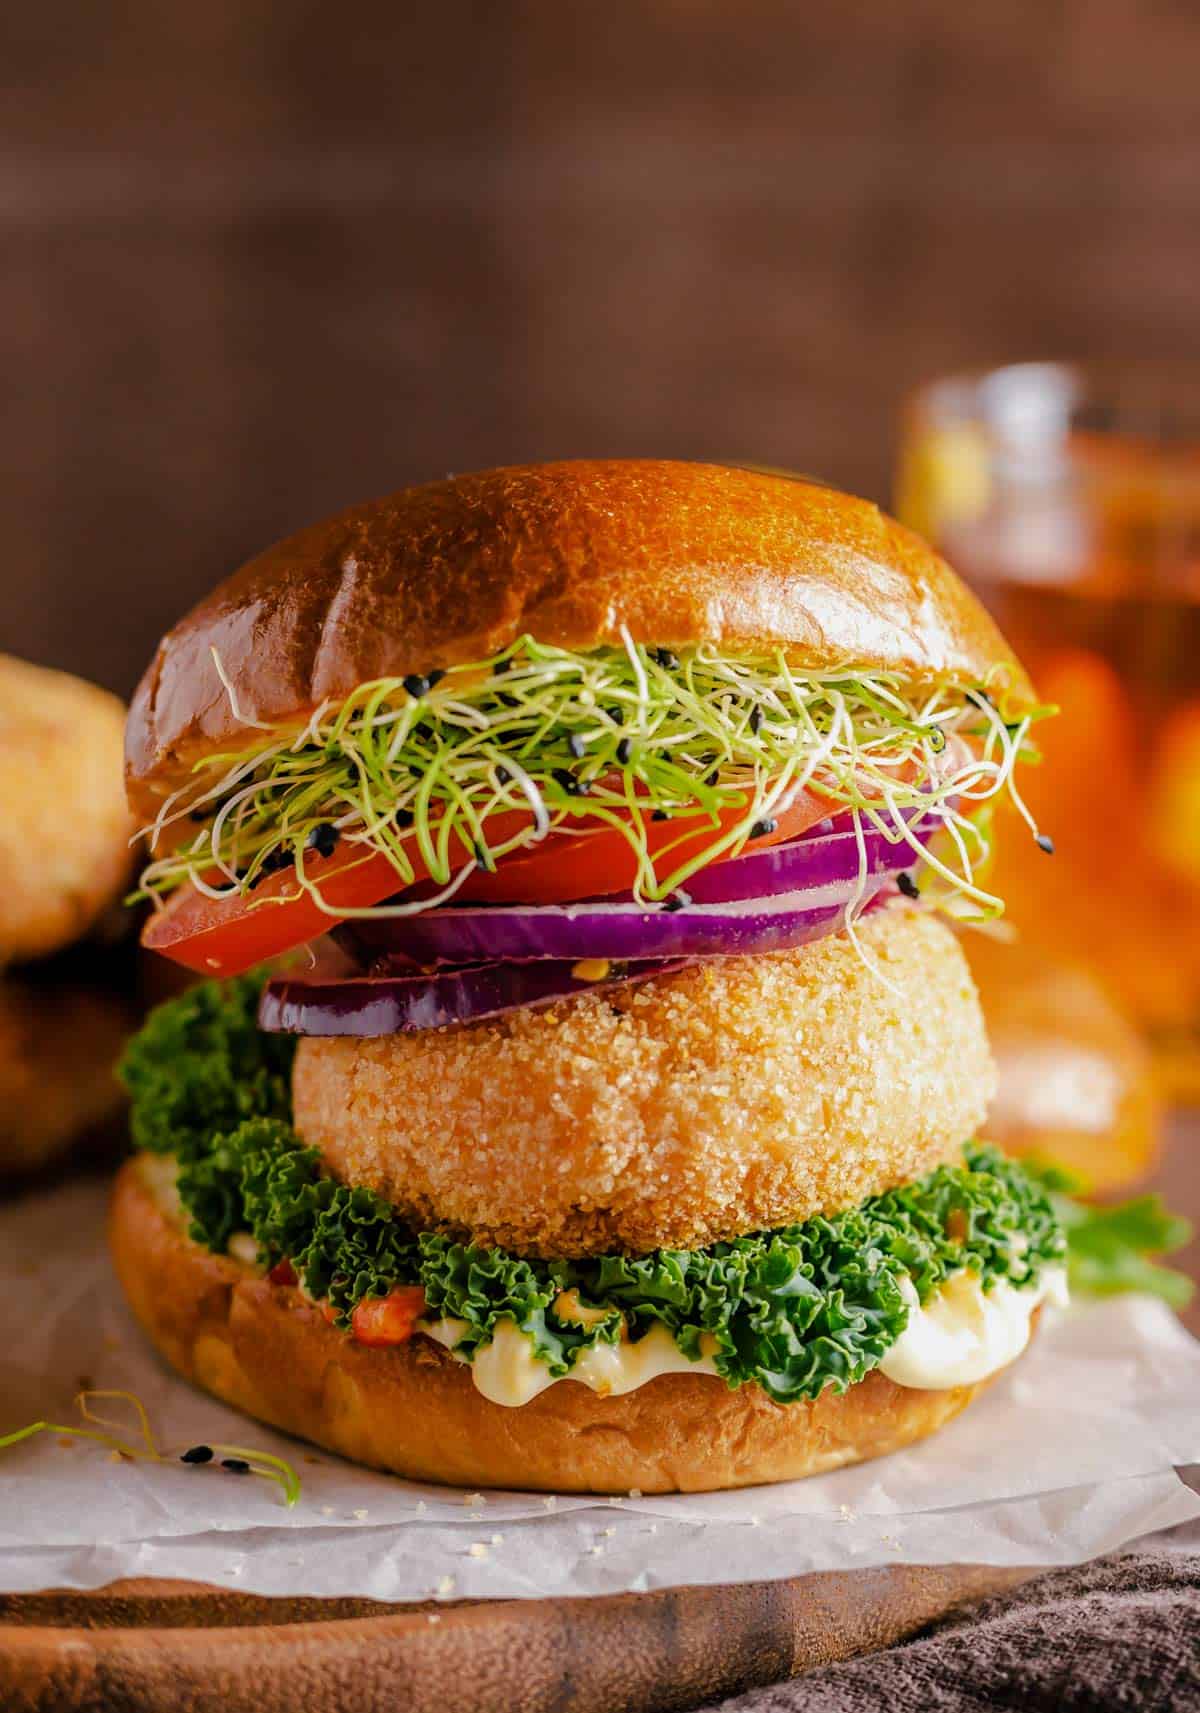 salmon patties served between burger buns, greens, tomato, red onion